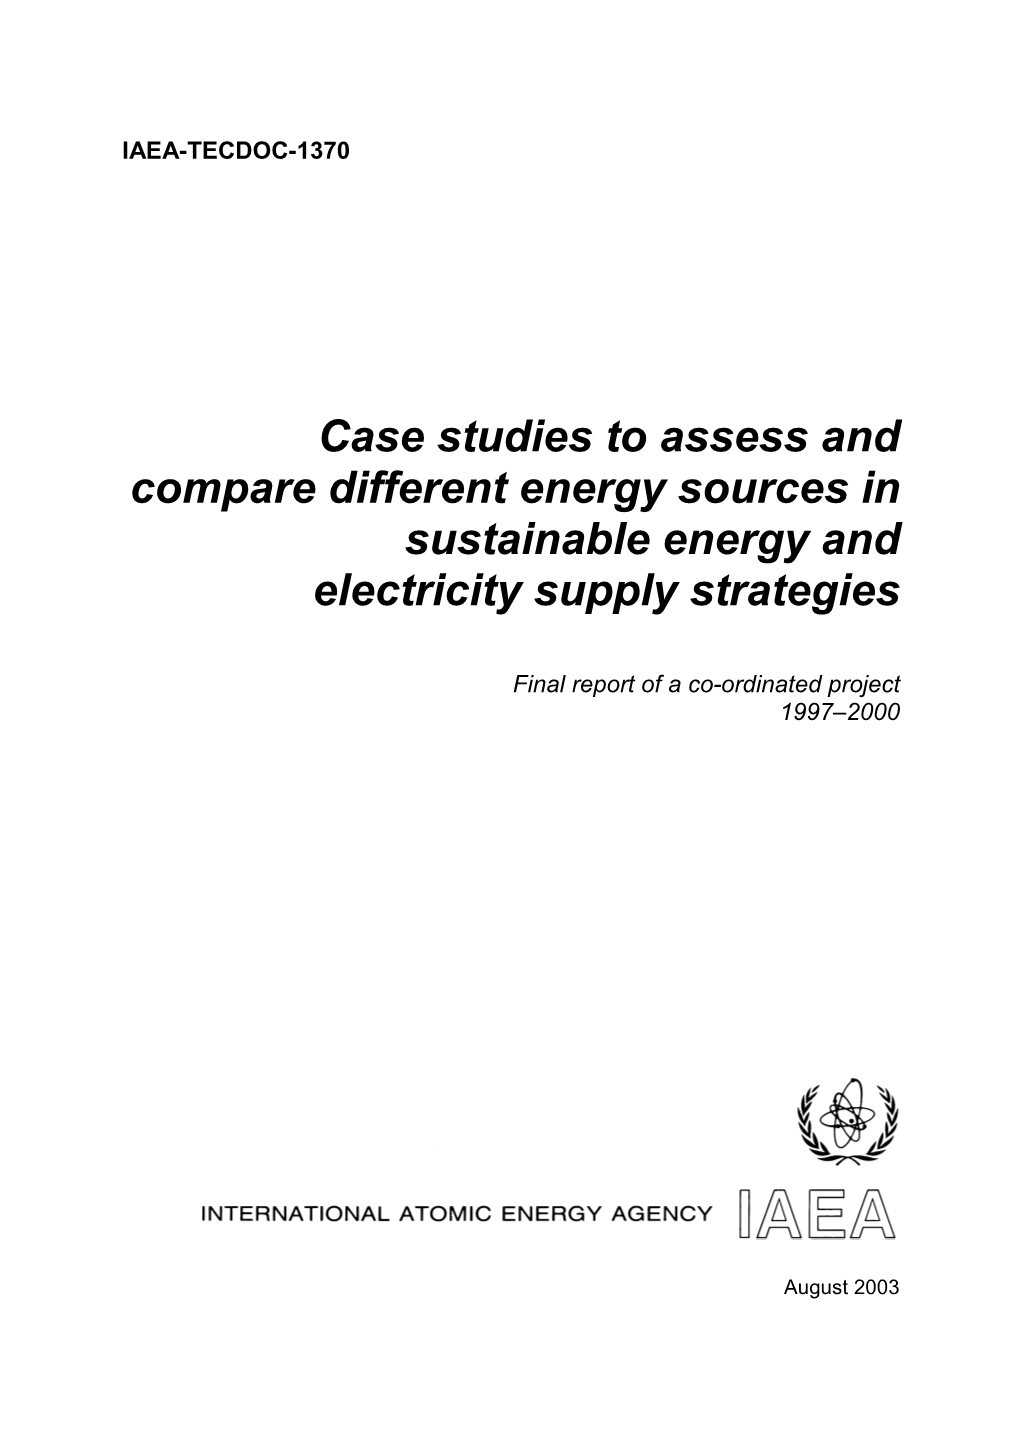 Case Studies to Assess and Compare Different Energy Sources in Sustainable Energy and Electricity Supply Strategies